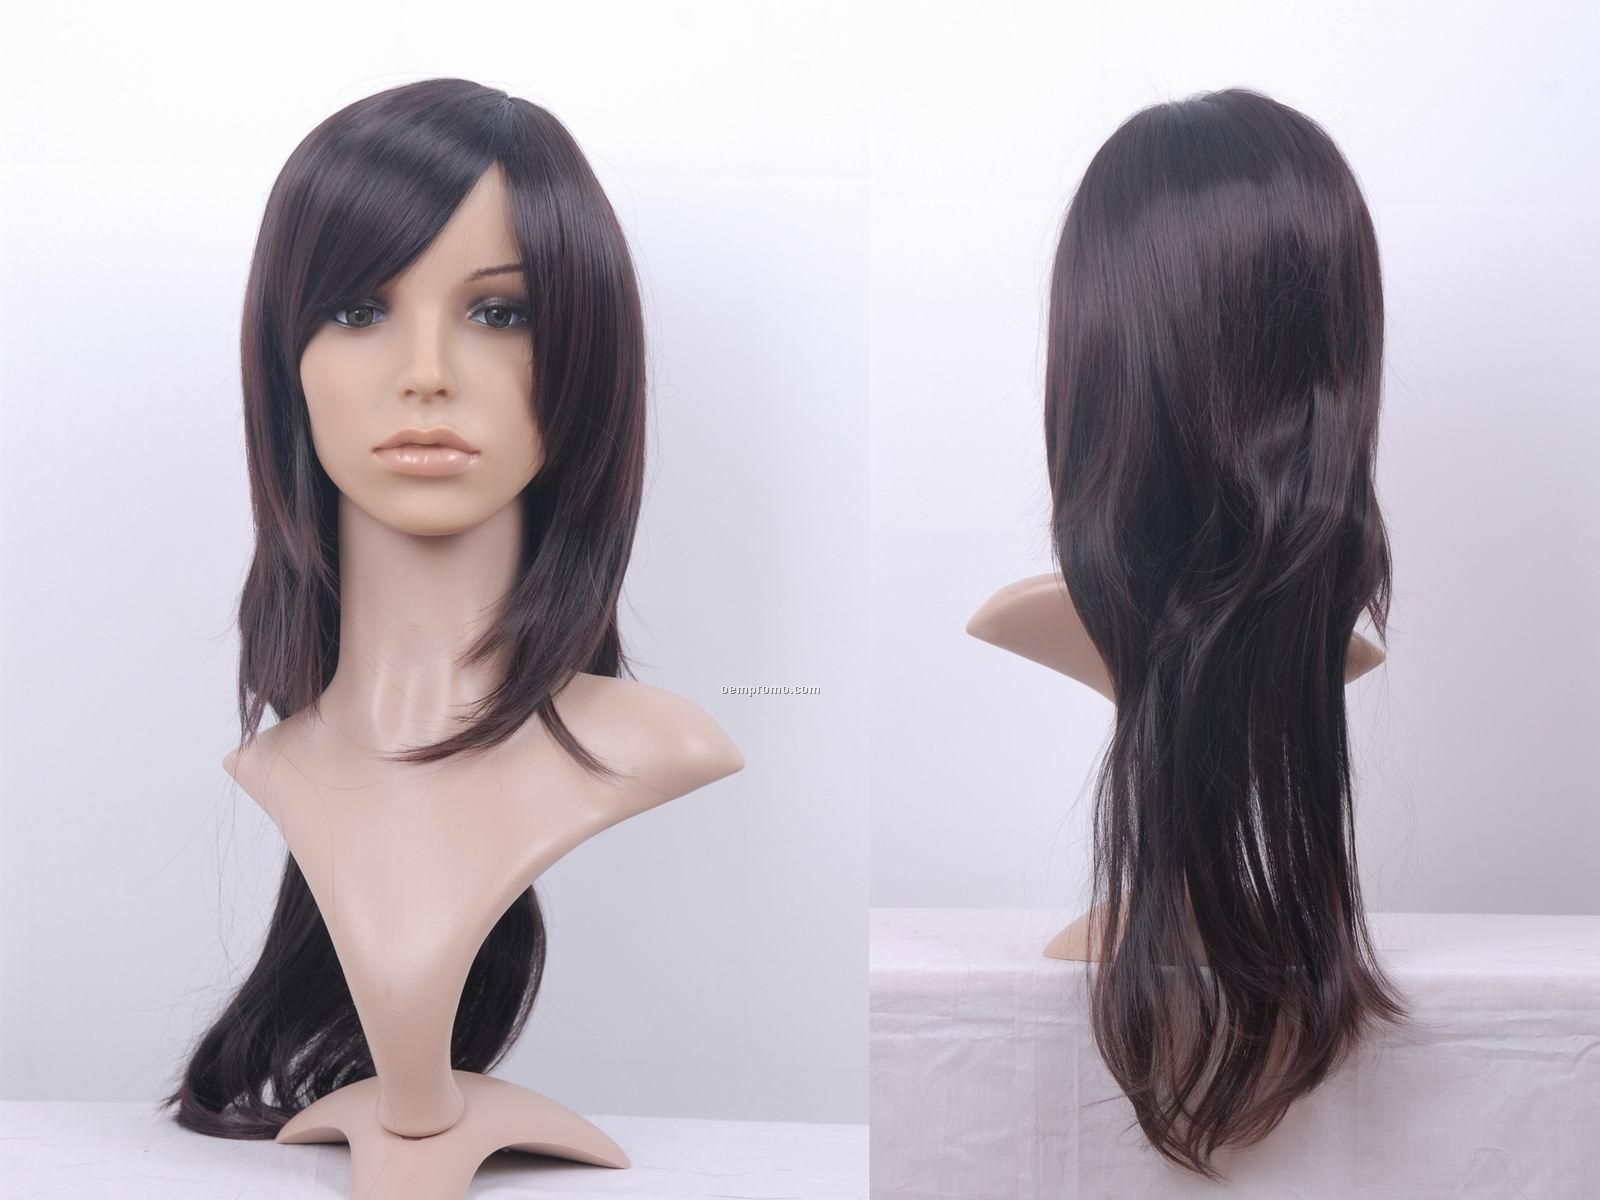 100% Synthetic Fiber Wigs